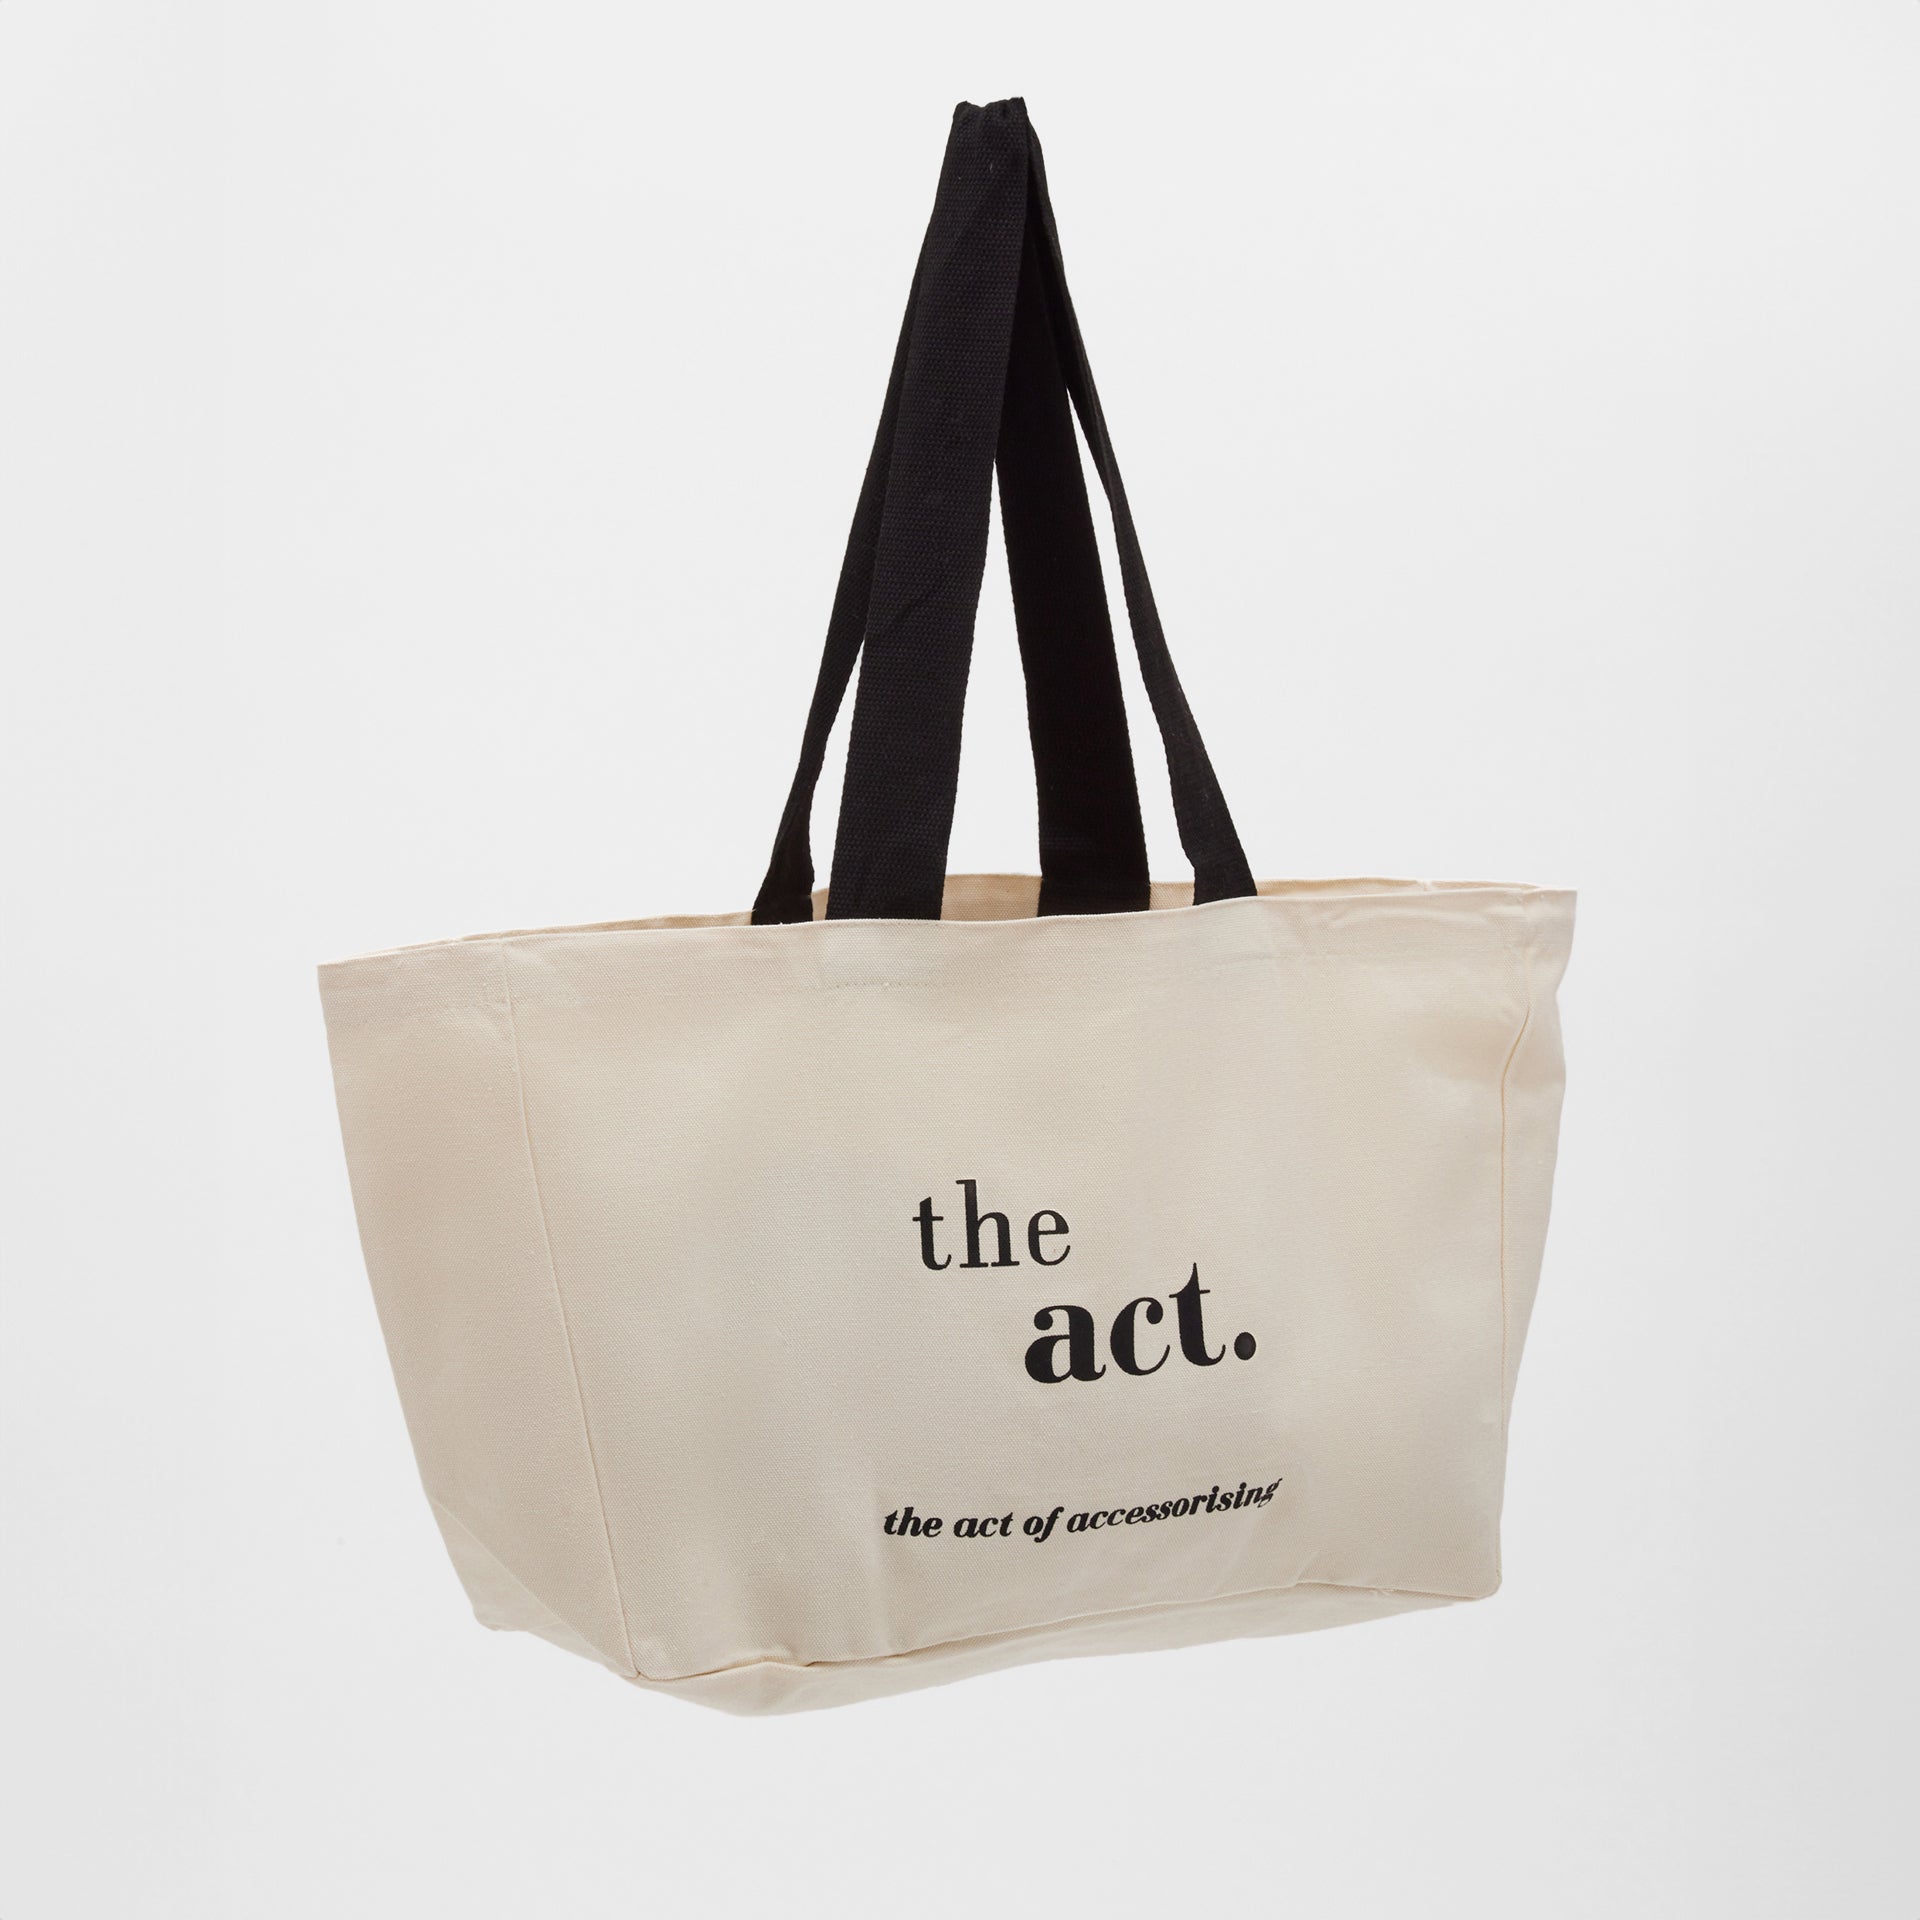 the tote